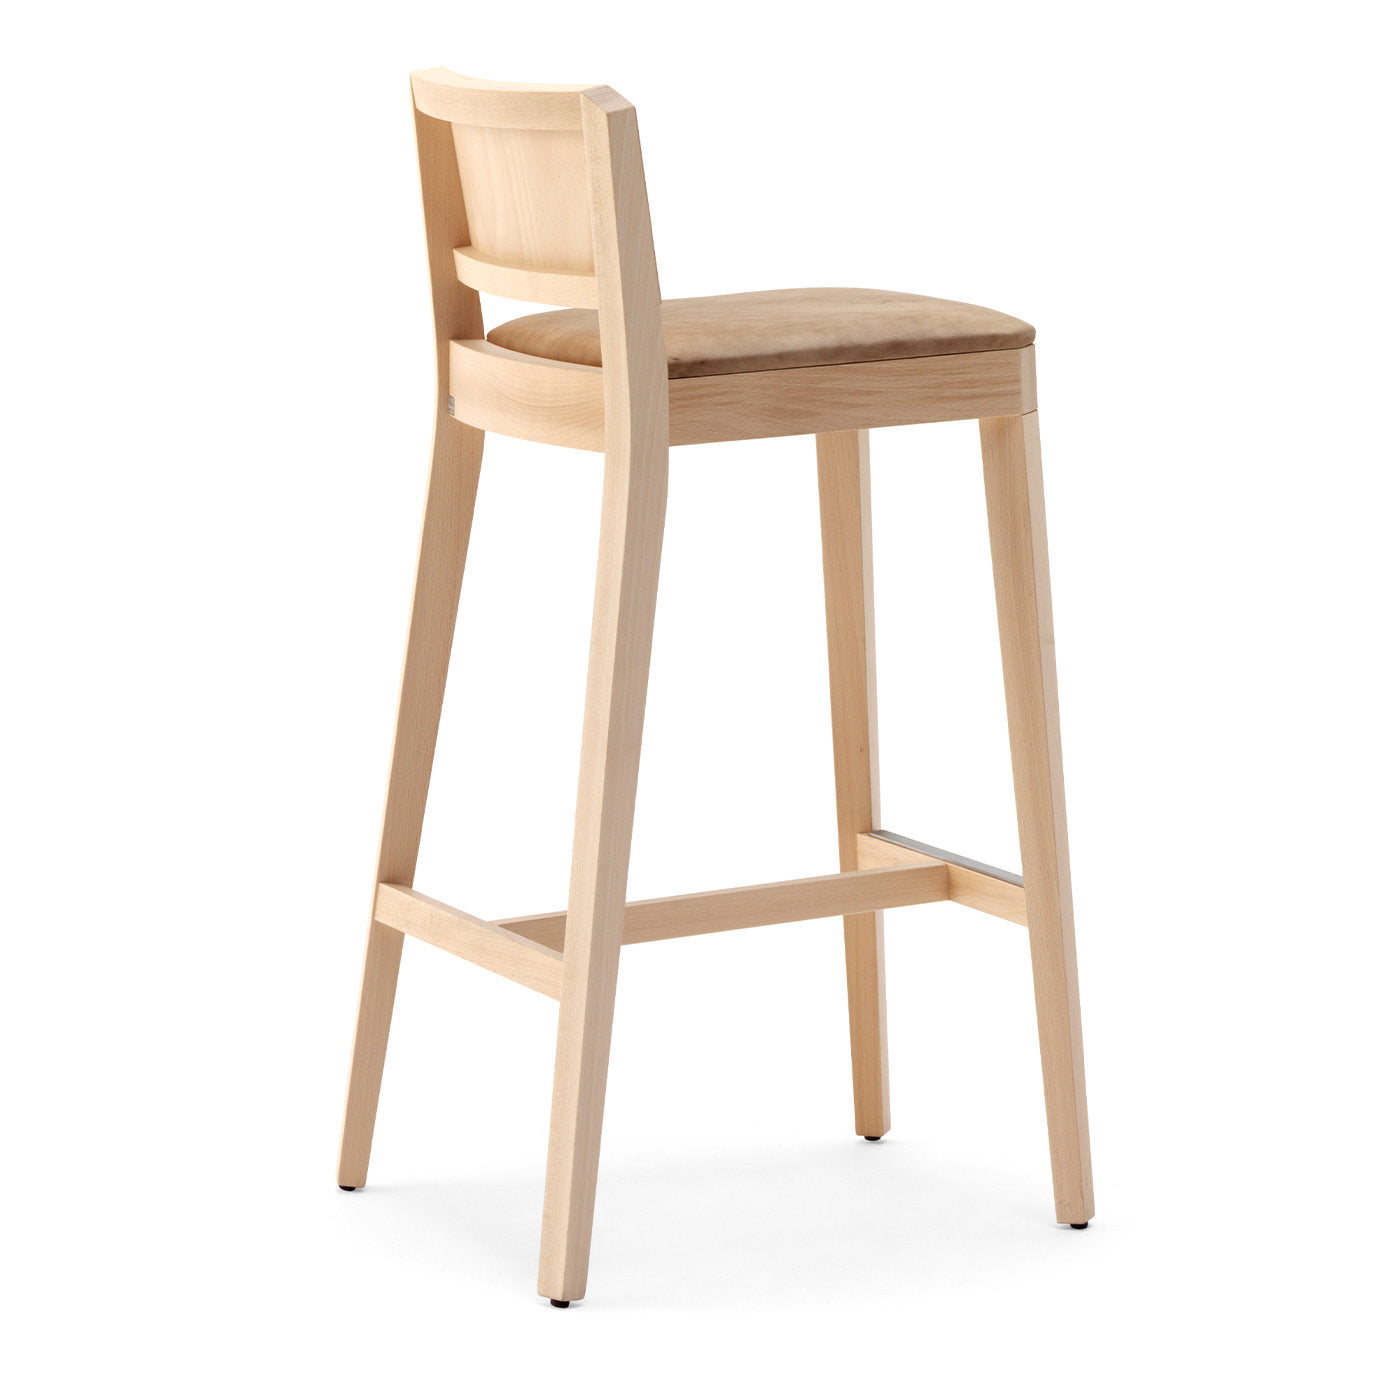 Stealth Ivory Leather Barstool - Alternative view 1